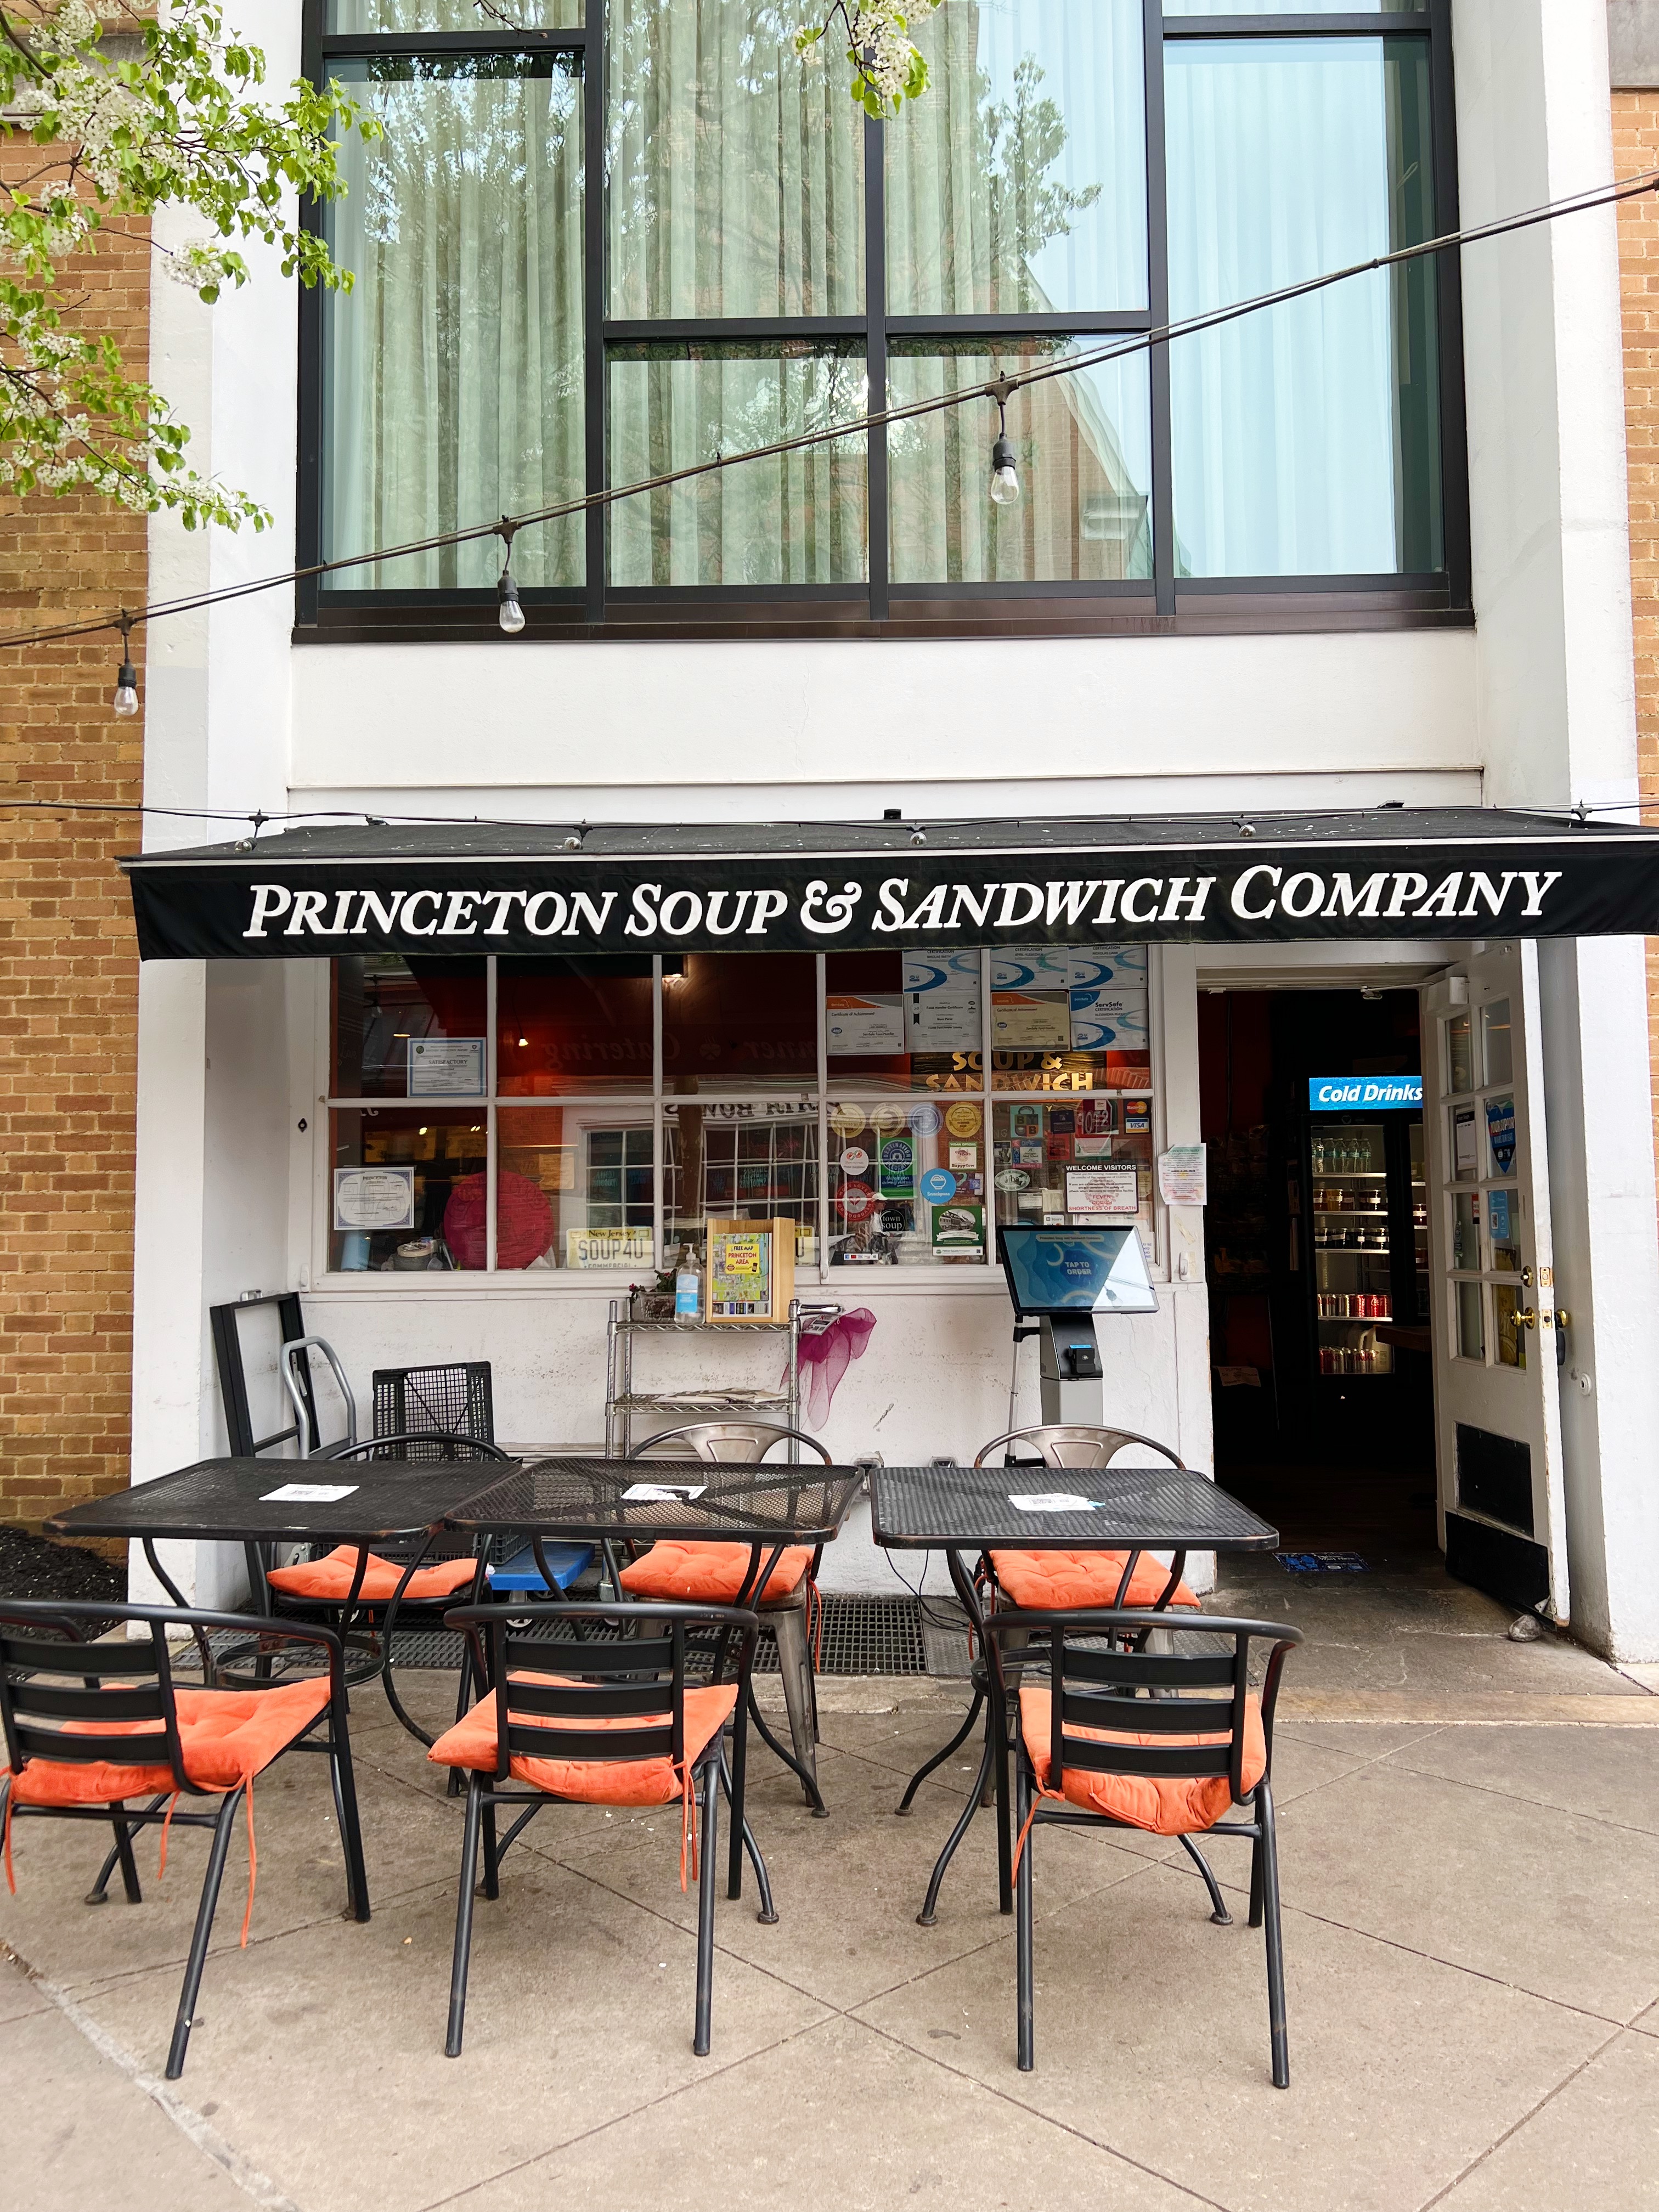 Exterior of Princeton Soup & Sandwich, white building with black trim, black "Princeton Soup & Sandwich" awning, and black metal chairs and tables with orange seat cushions